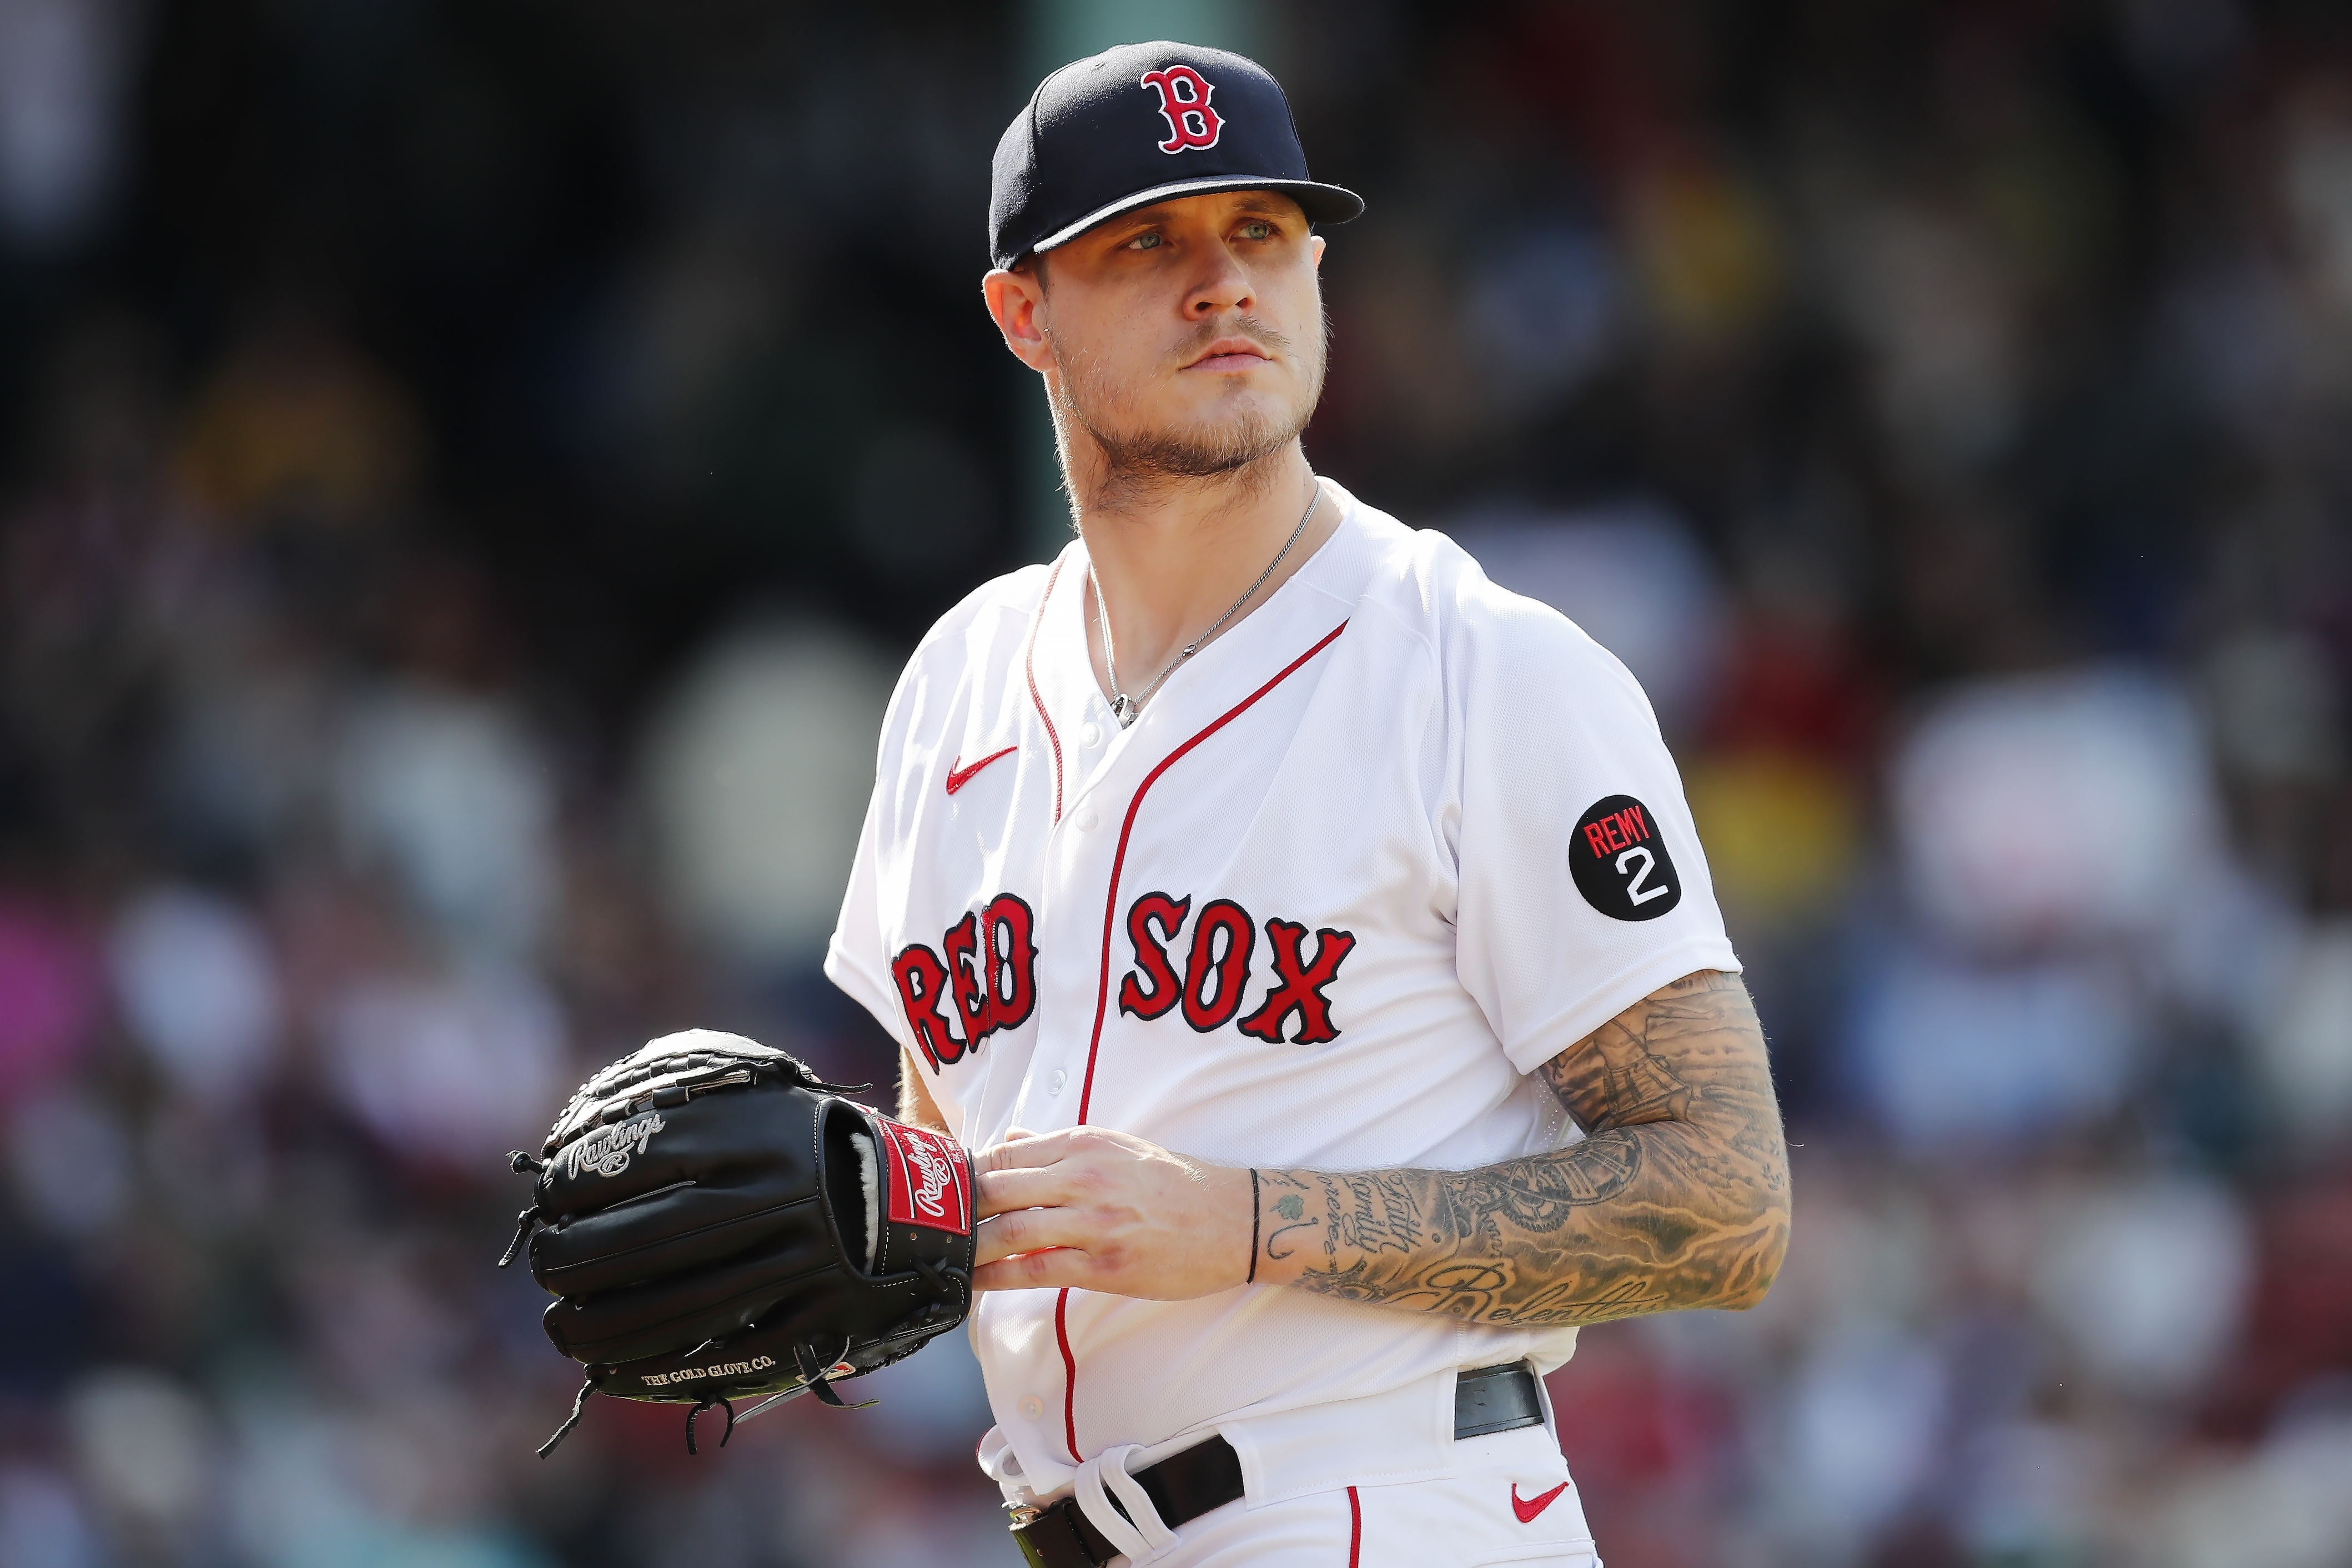 Tanner Houck, Boston Red Sox prospect with high-90s heater, added 20 hours  worth of tattoos, 'velo pouch' during offseason 